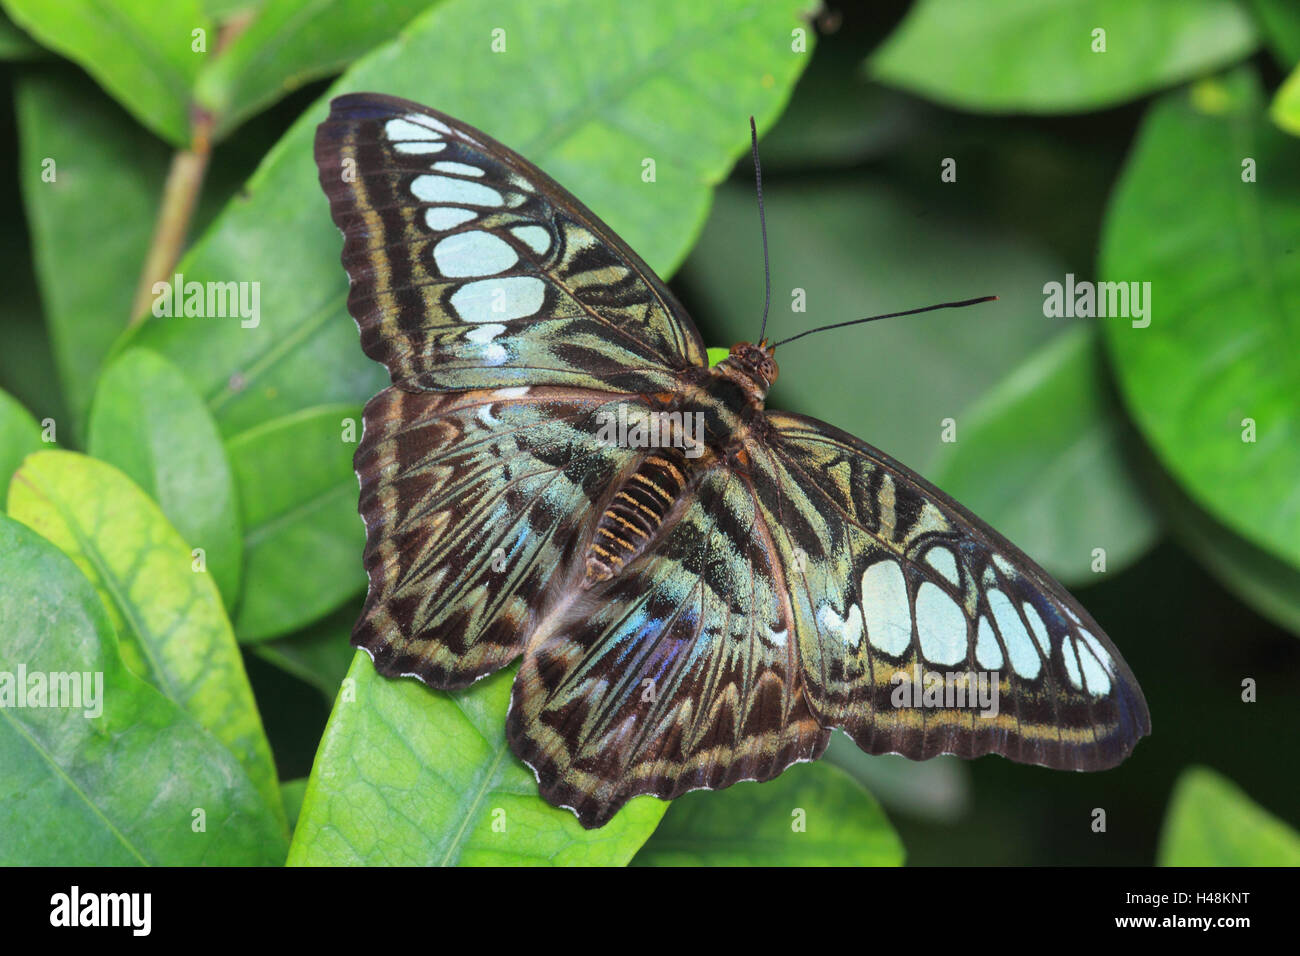 Tiger's butterflies, medium close-up, landscape format, Asia, insect, wild animal, butterfly, animal, rainforest, wing, spread, tiger's butterfly, leaves, sit, Stock Photo